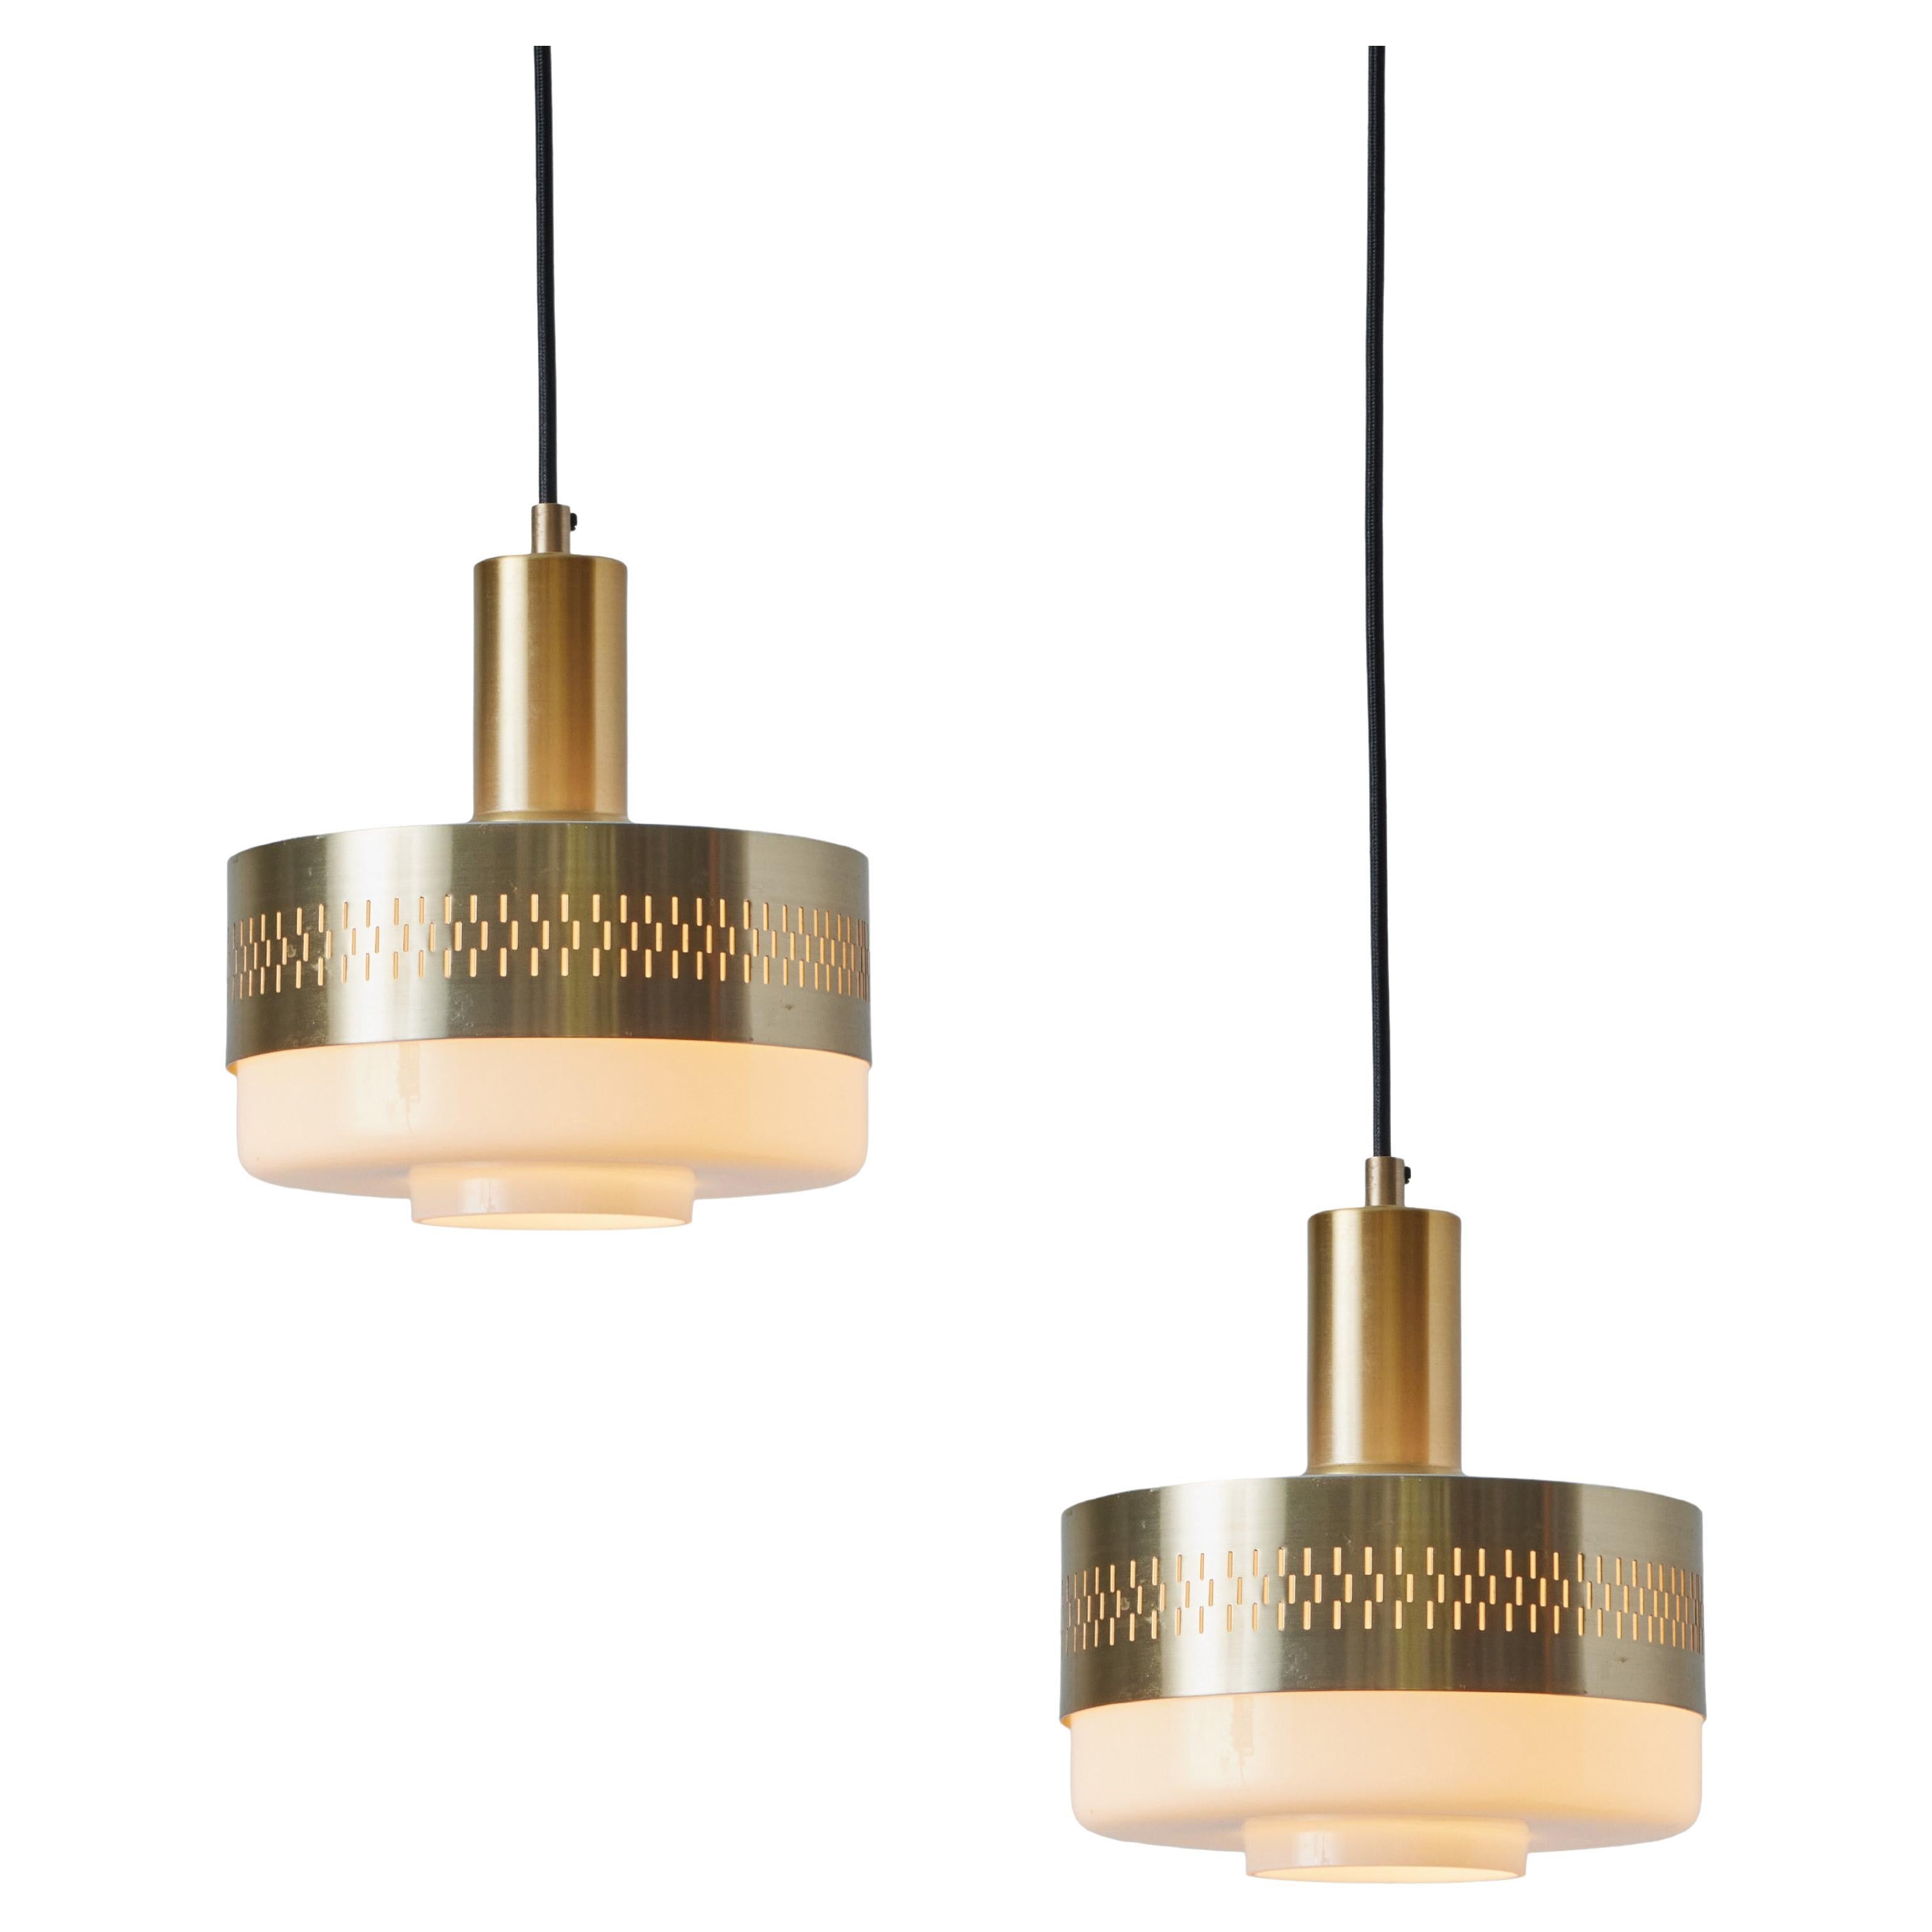 1960s Perforated Brass & Glass Pendant Attributed to Hans-Agne Jakobsson For Sale